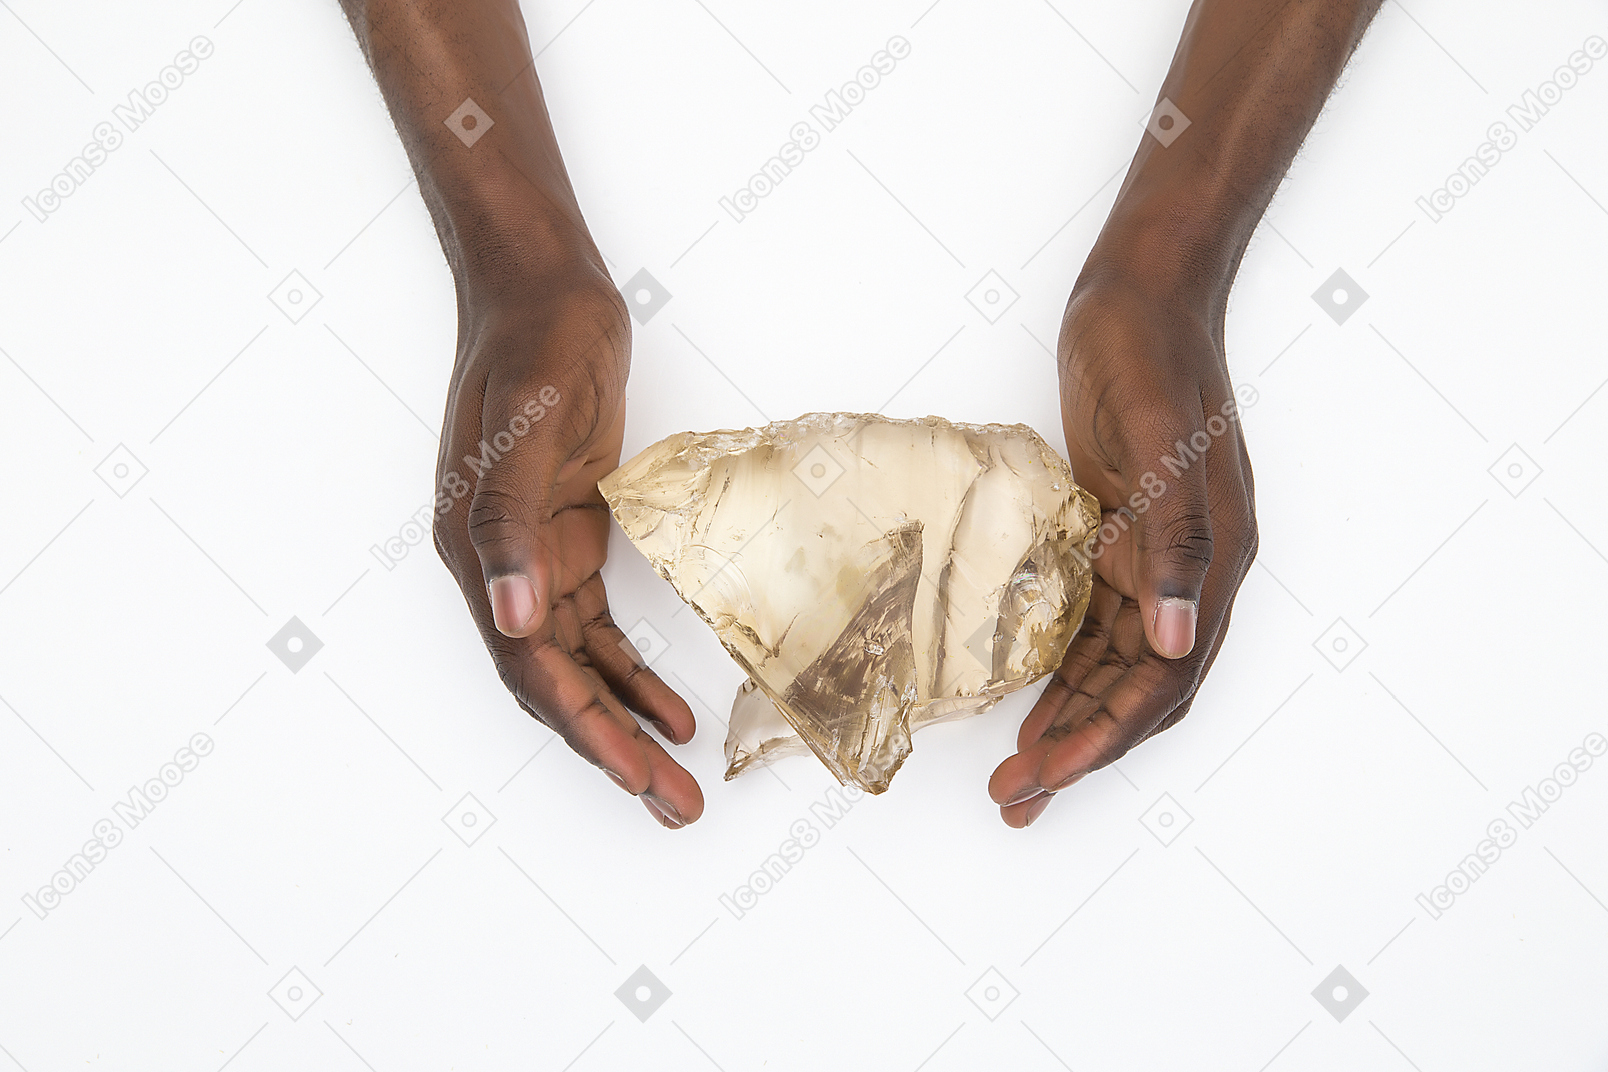 Black male hands holding a seashell